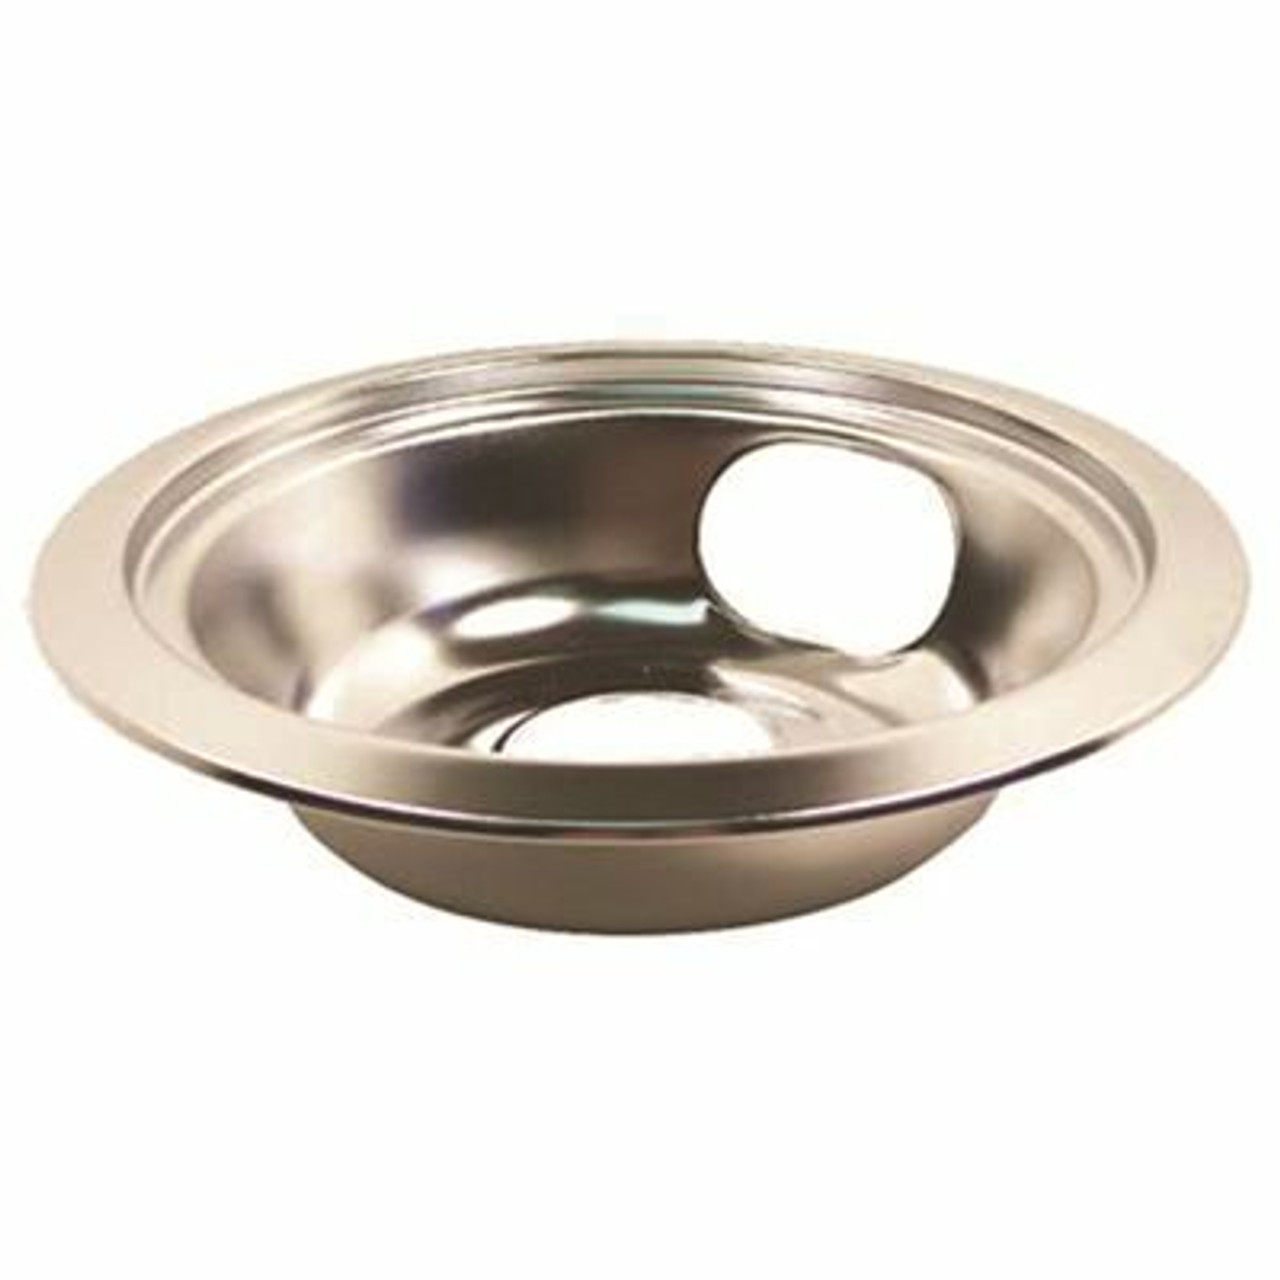 Electric Range Drip Pan Fits Ge And Hotpoint Ranges In Chrome, 8 In. (6-Pack) - 2489358